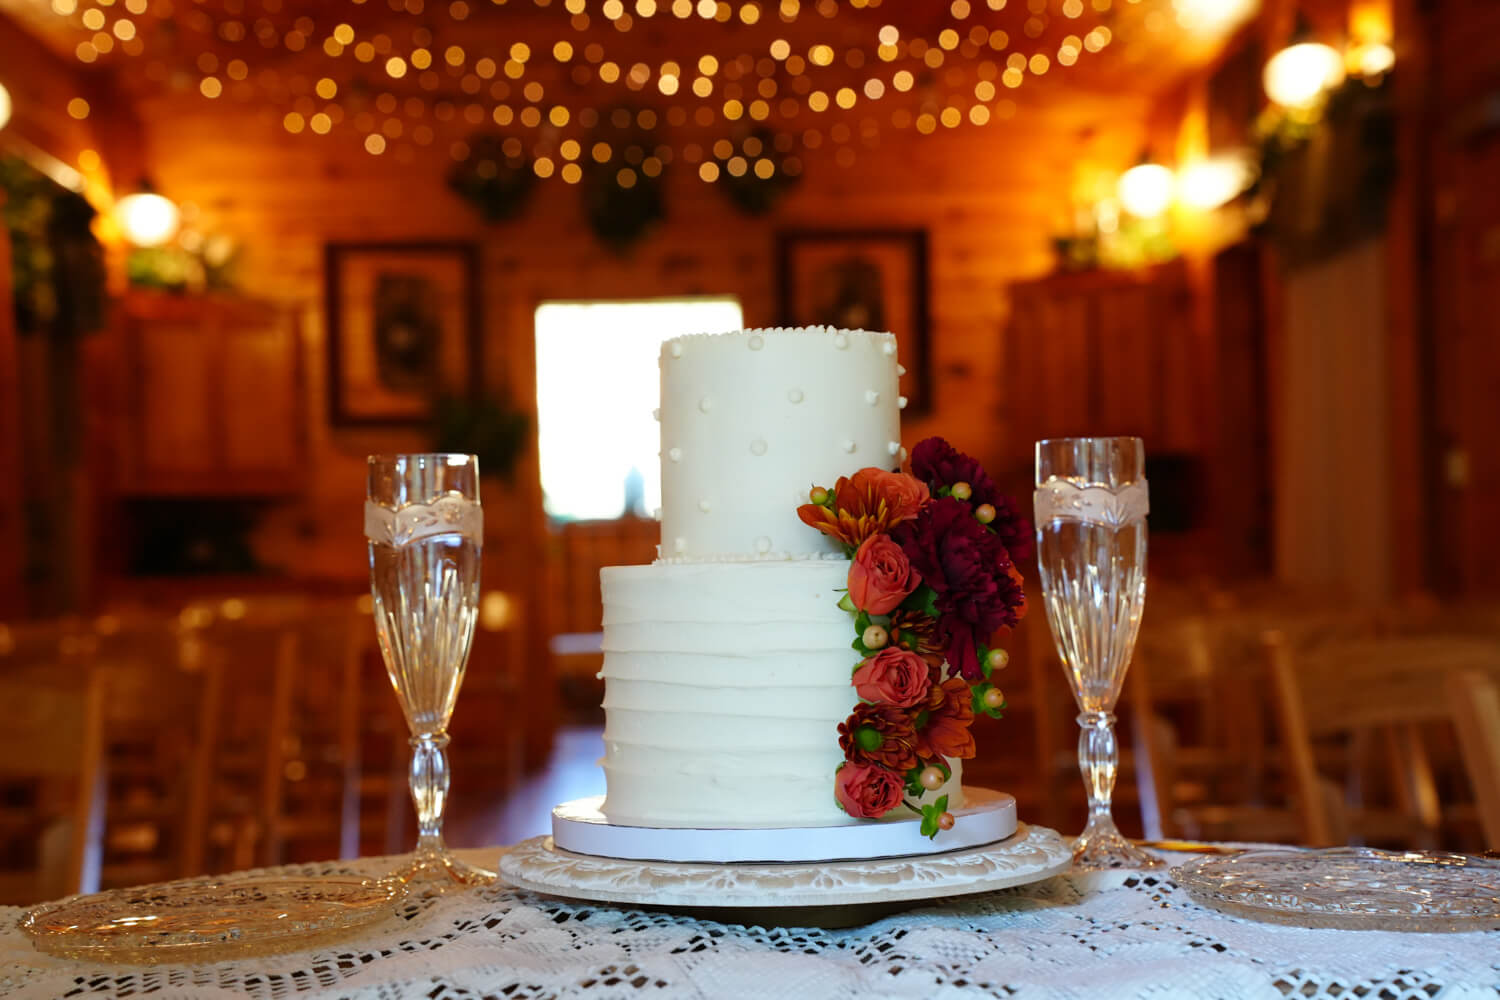 Wedding cake and toasting glasses sitting on a table in a wedding chapel with pine wood walls and twinkling lights hanging from the ceiling